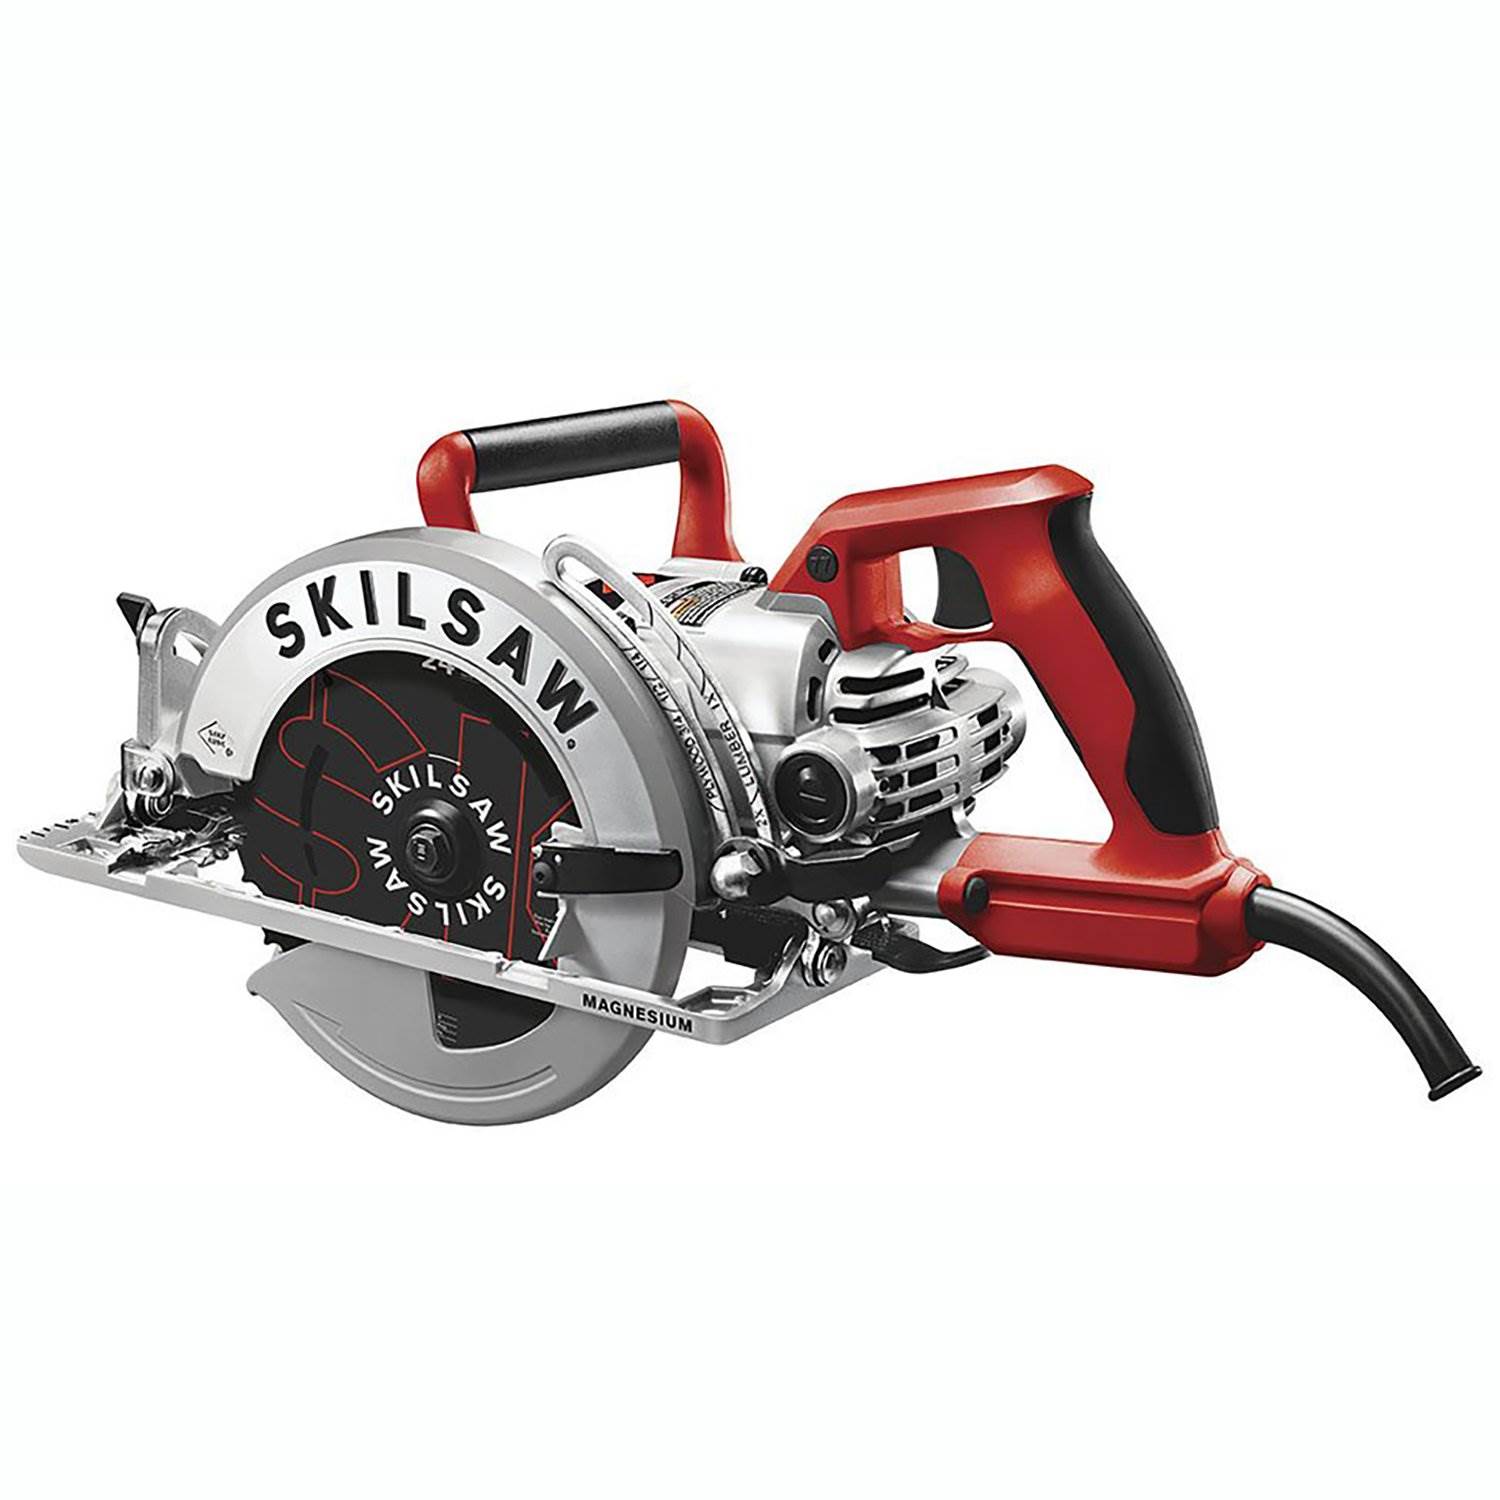 SKIL SPT77WML-01 7-1/4" Lightweight 15Amp Corded Magnesium Worm Drive Circular Saw - image 1 of 7